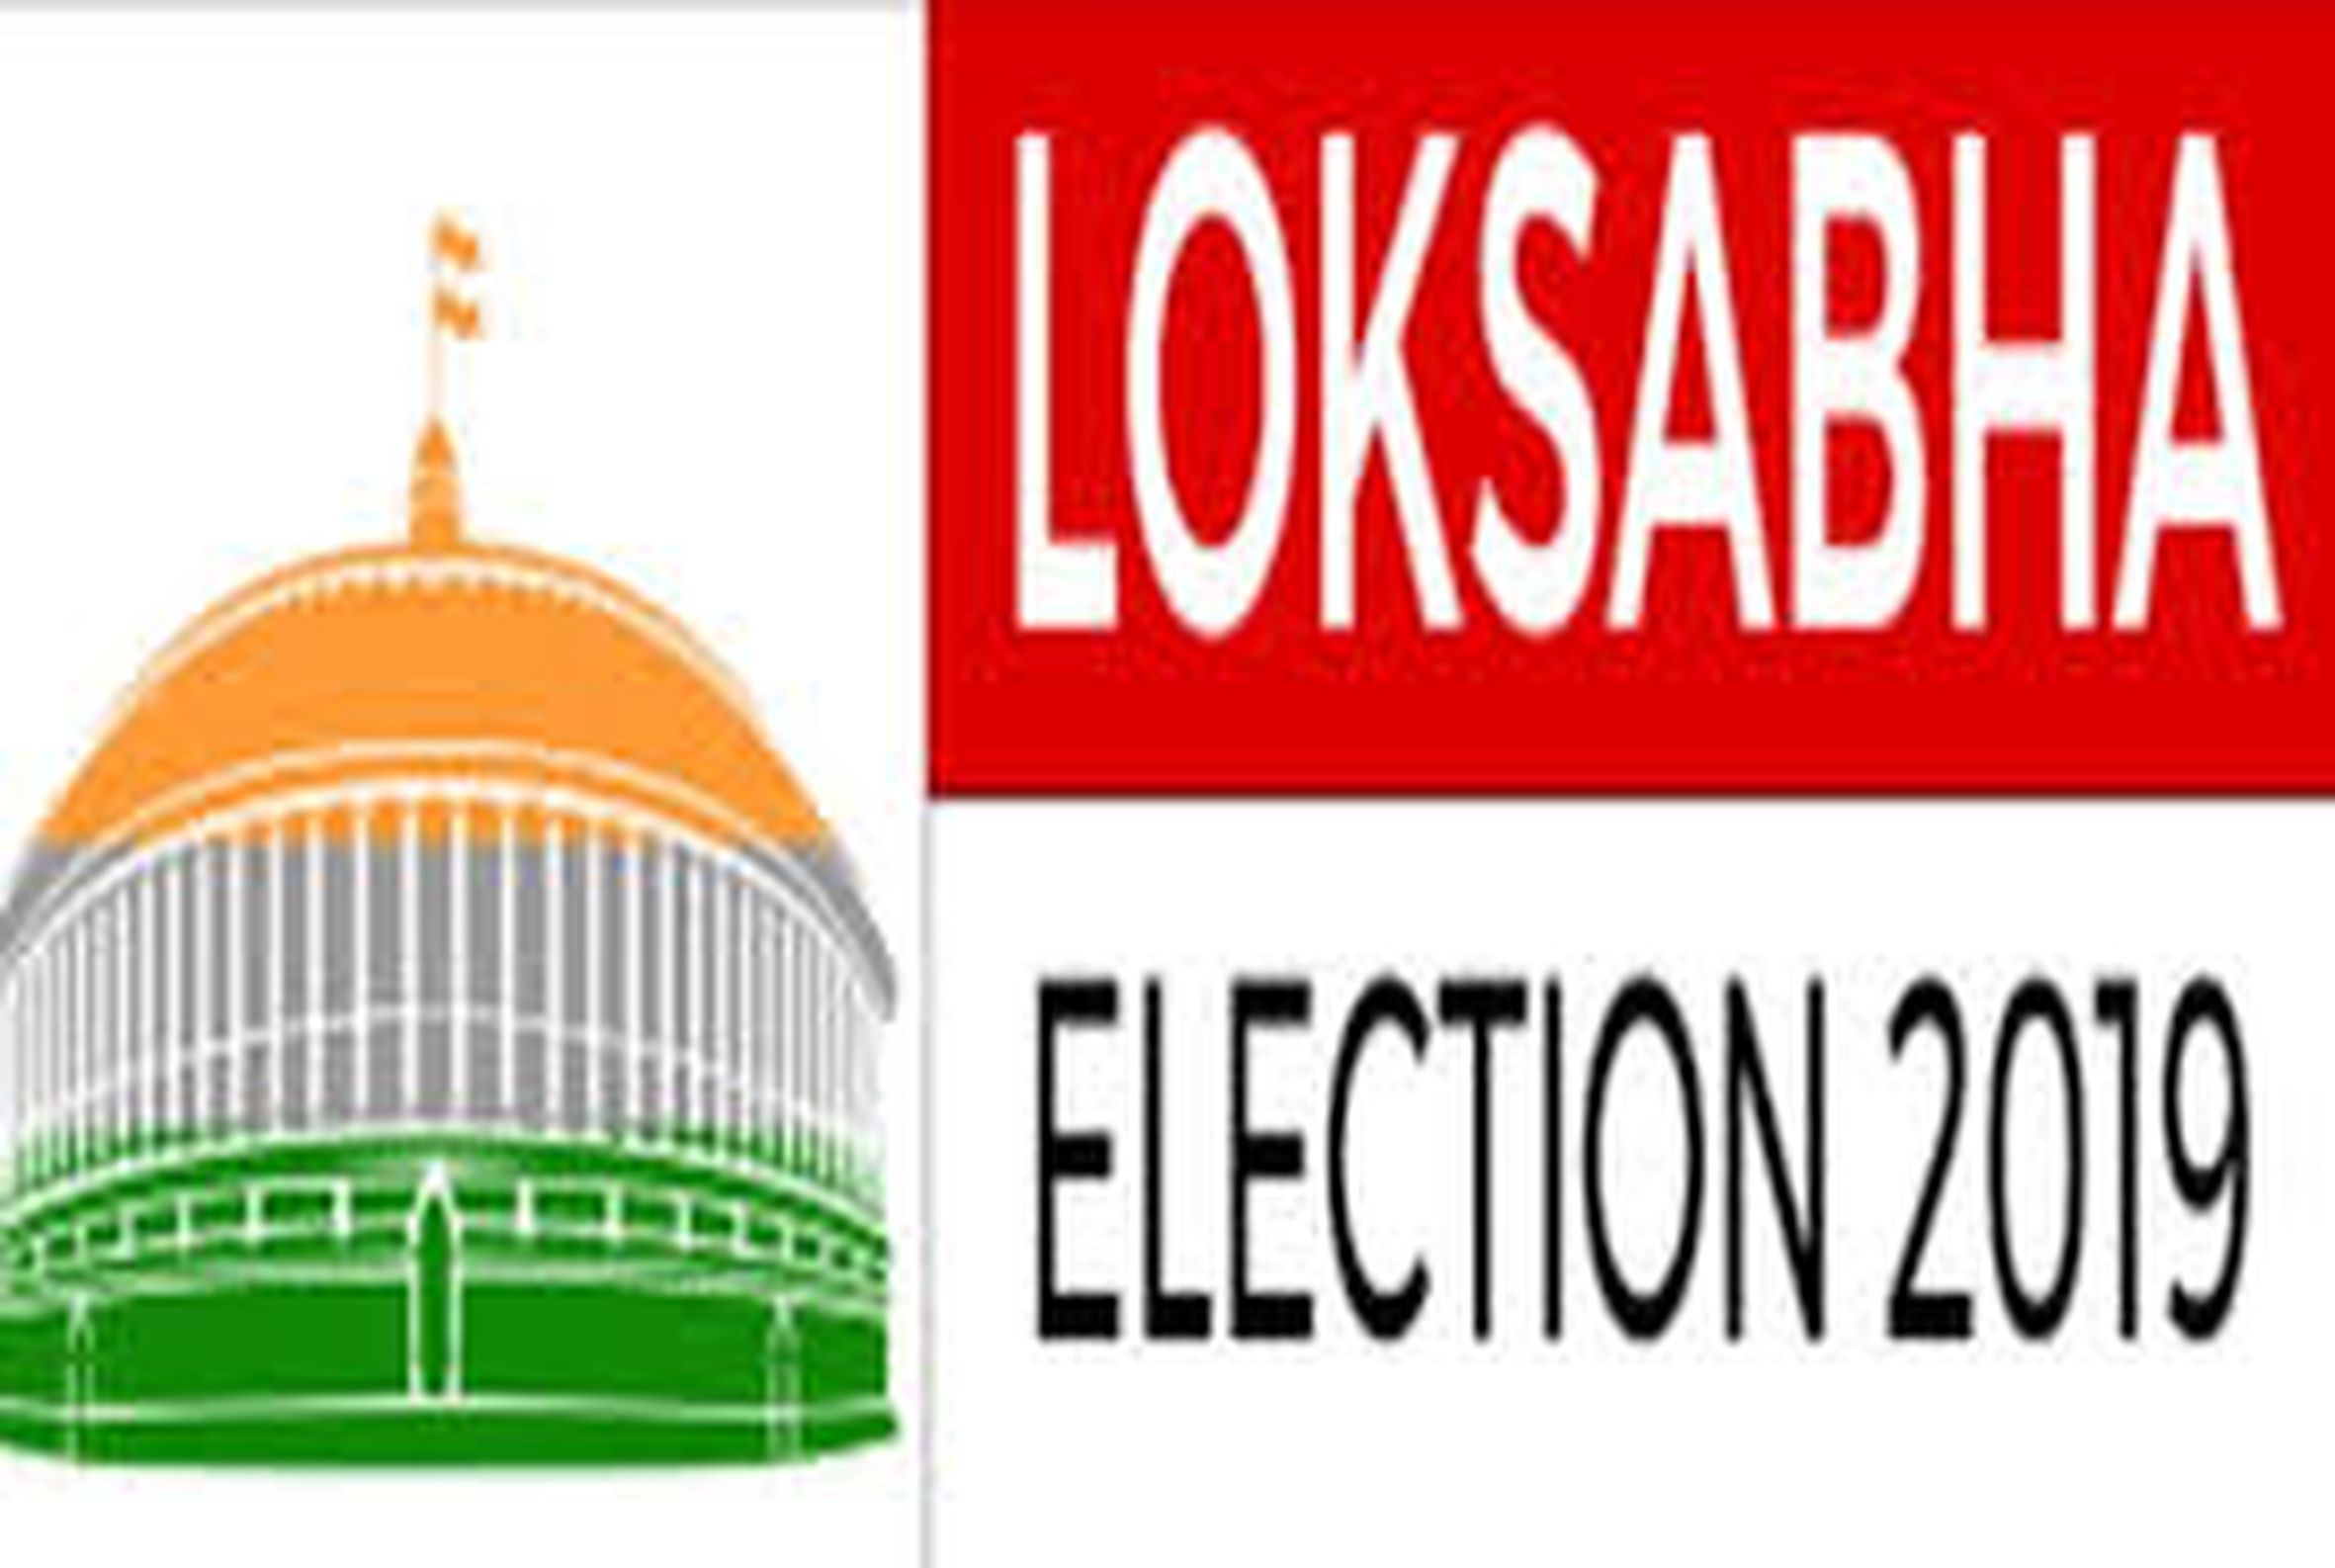 Possible candidates for Lok Sabha elections